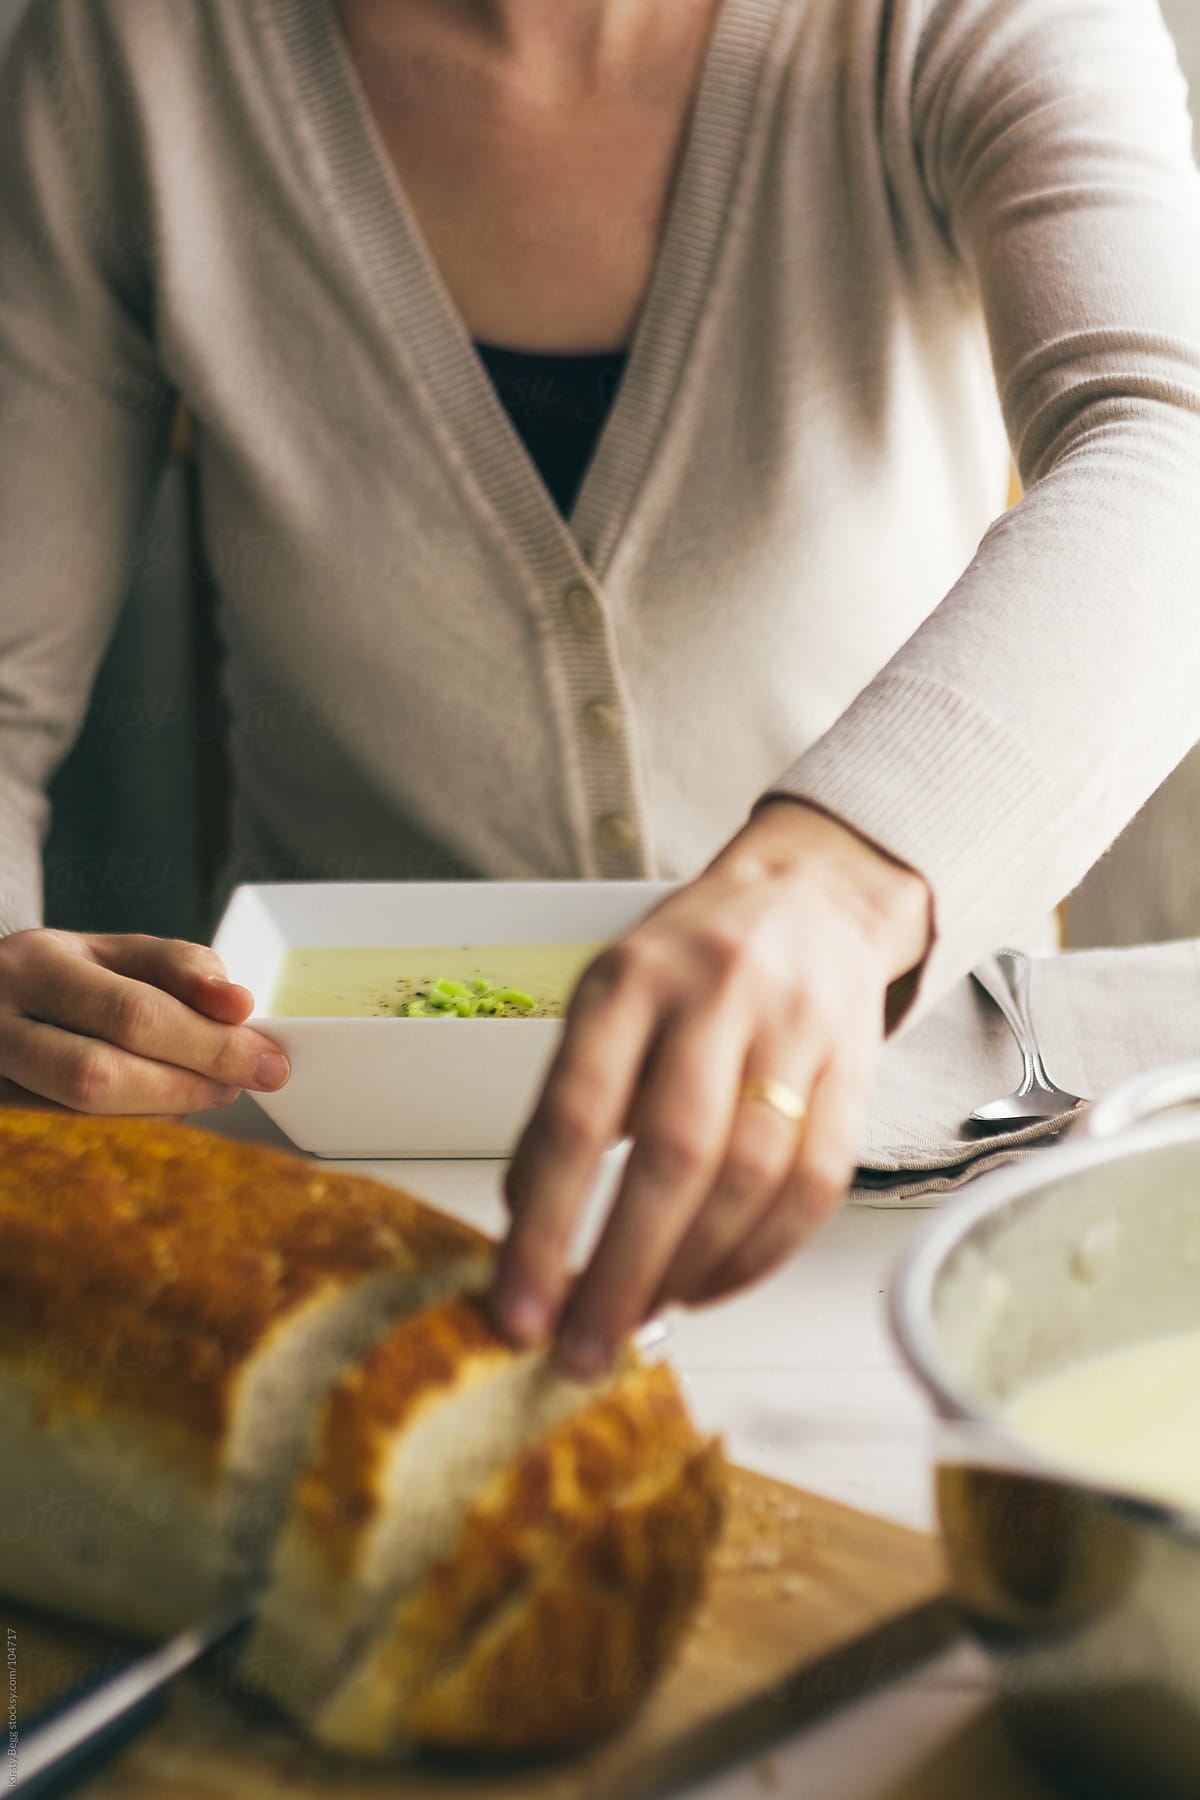 Woman reaching for bread with soup bowl set in front of her